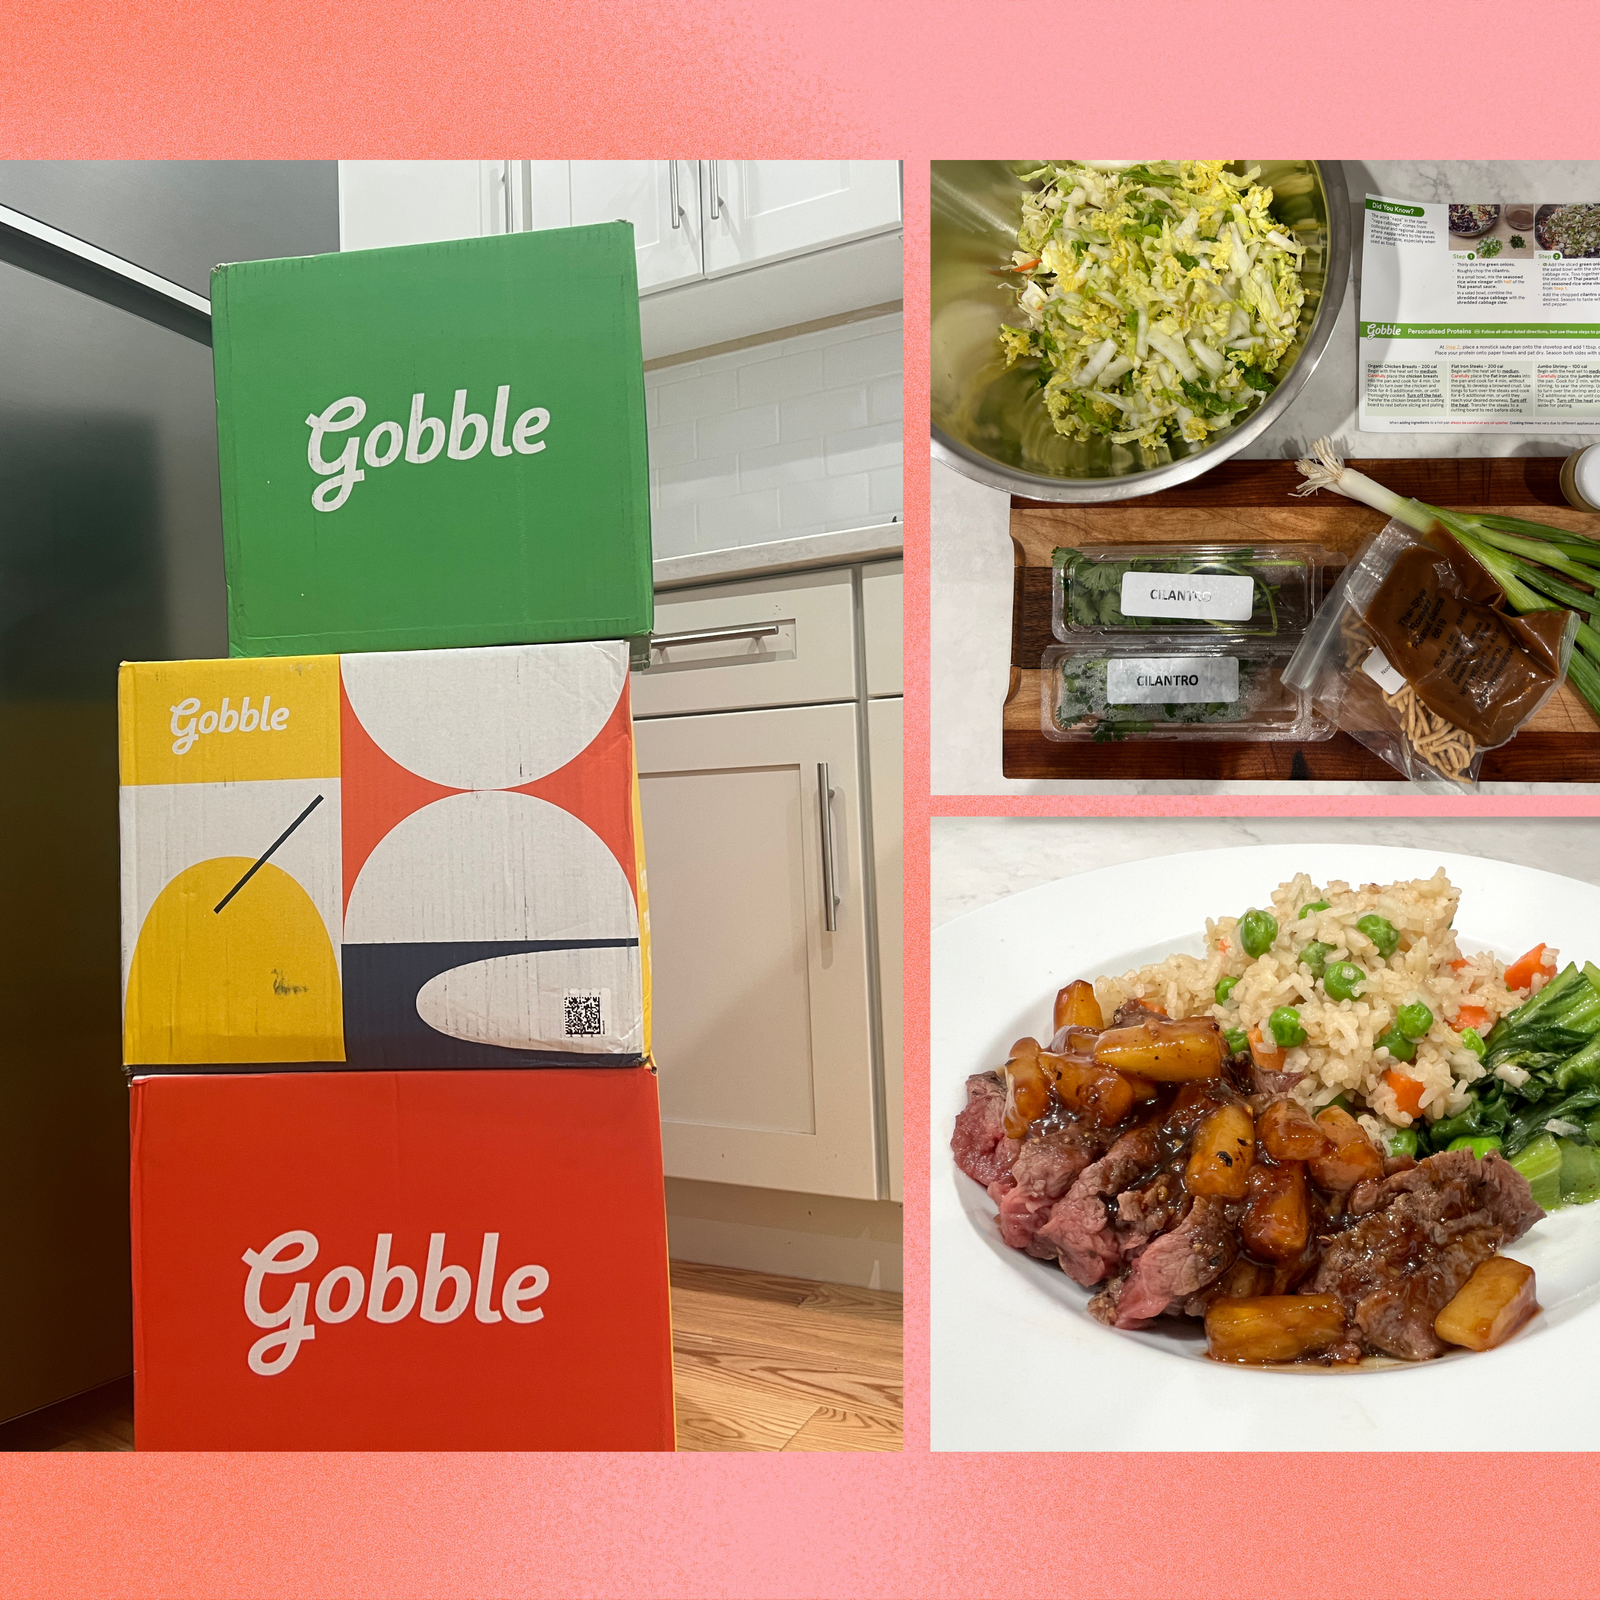 I Tried a 15-Minute Meal Kit Delivery Service&#8212;Here Are My Thoughts